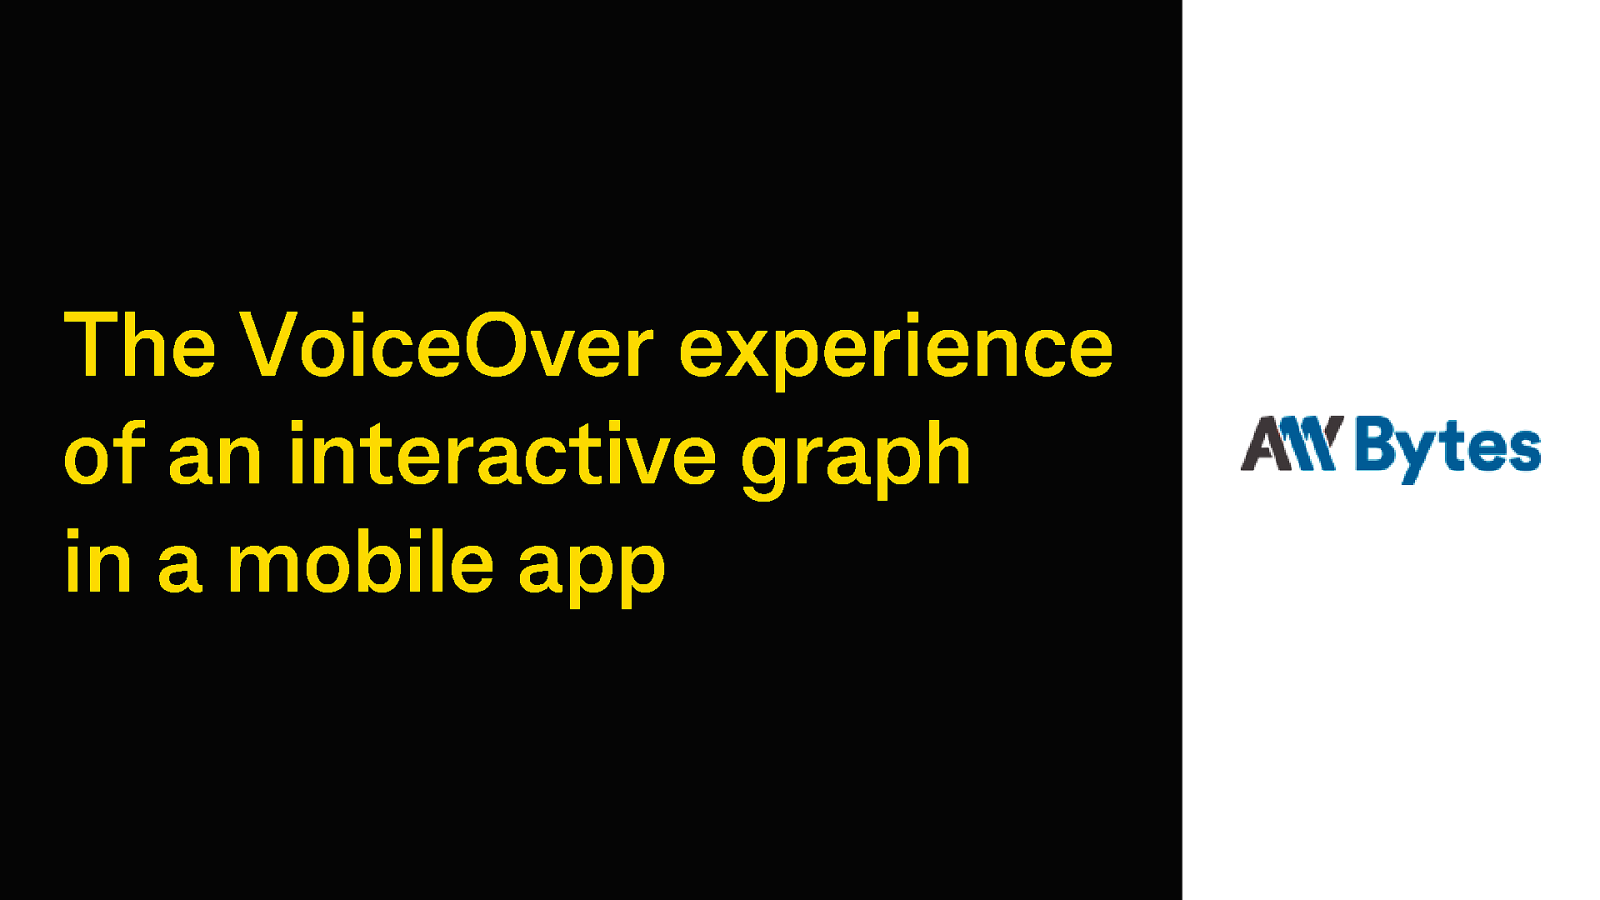 The VoiceOver experience of an interactive graph in a mobile app